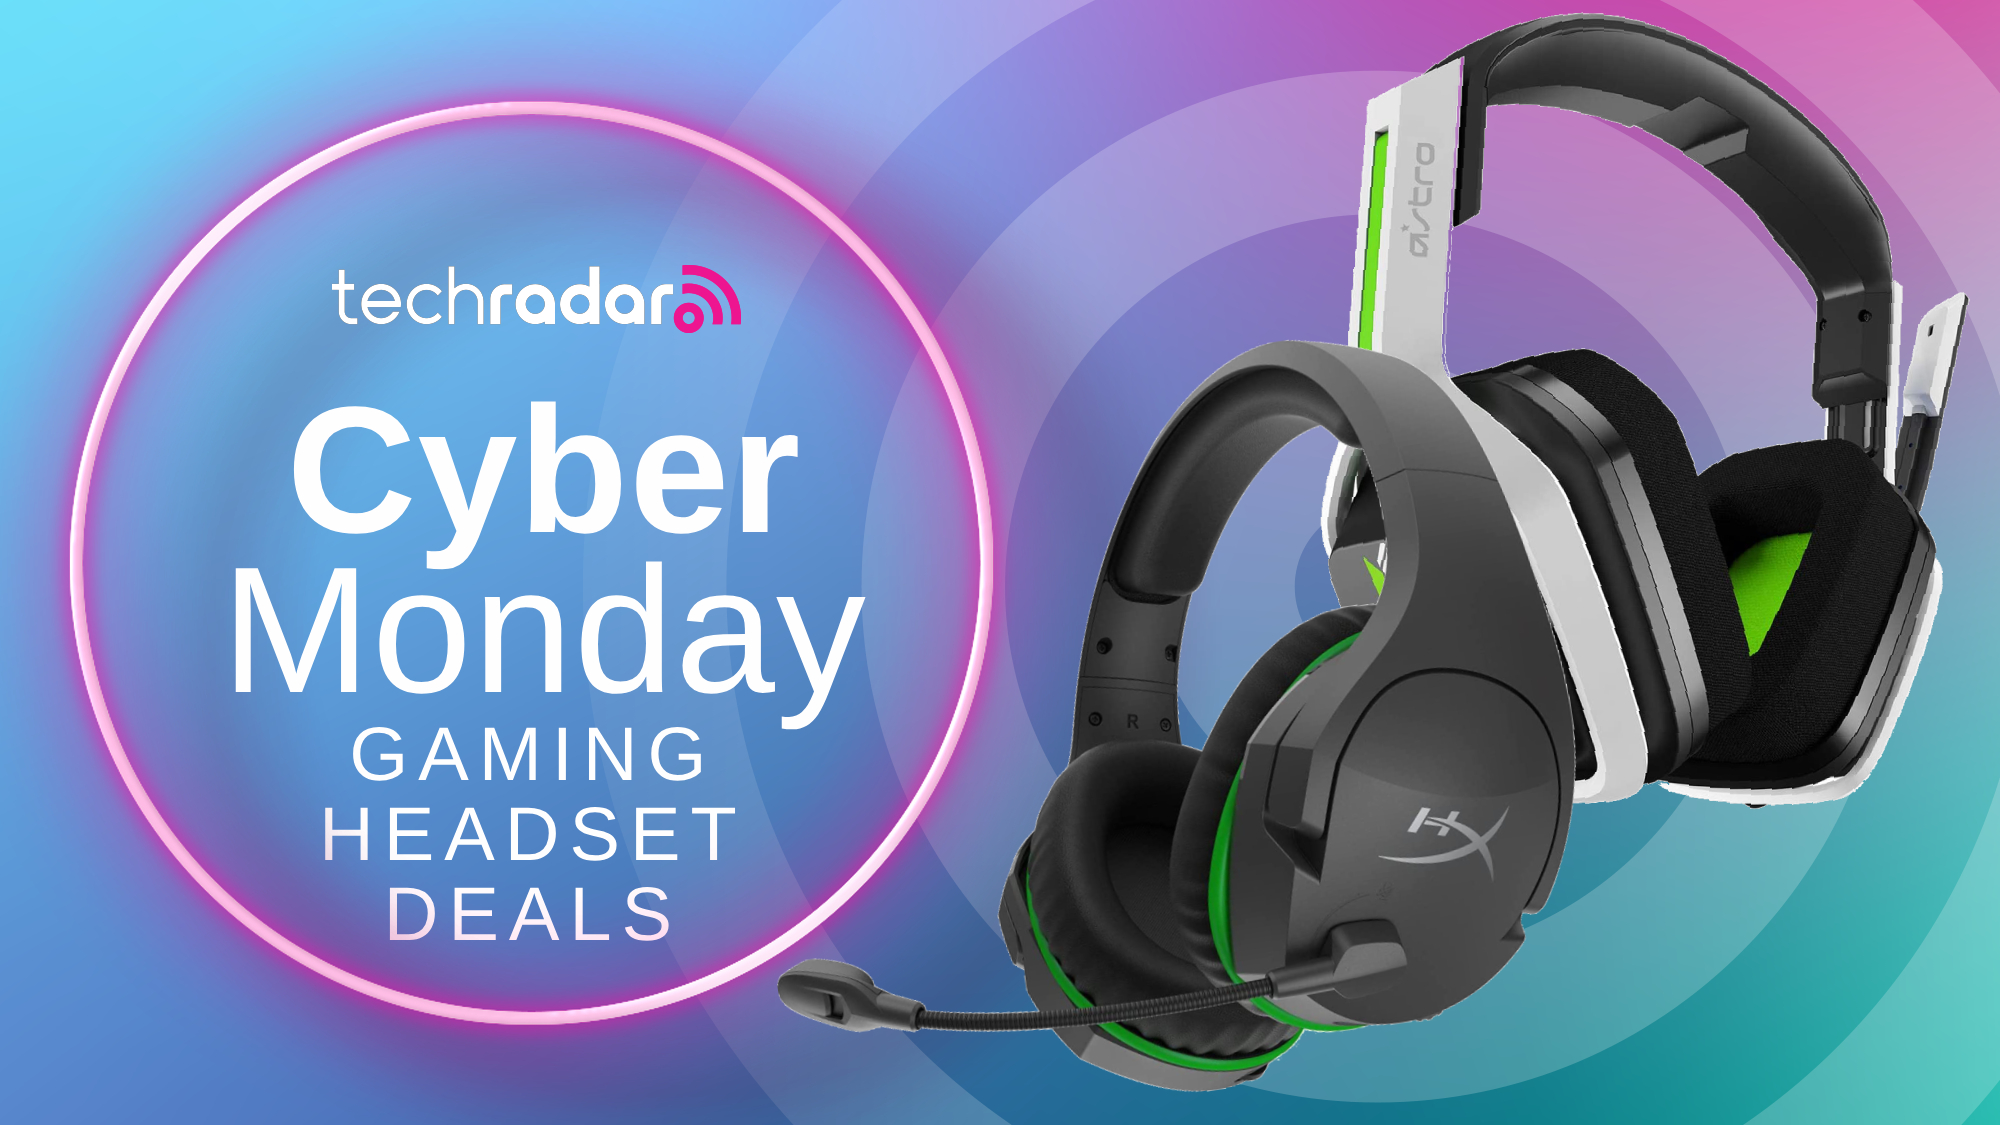 Save $50 on the well-liked HyperX Cloud II wireless gaming headset